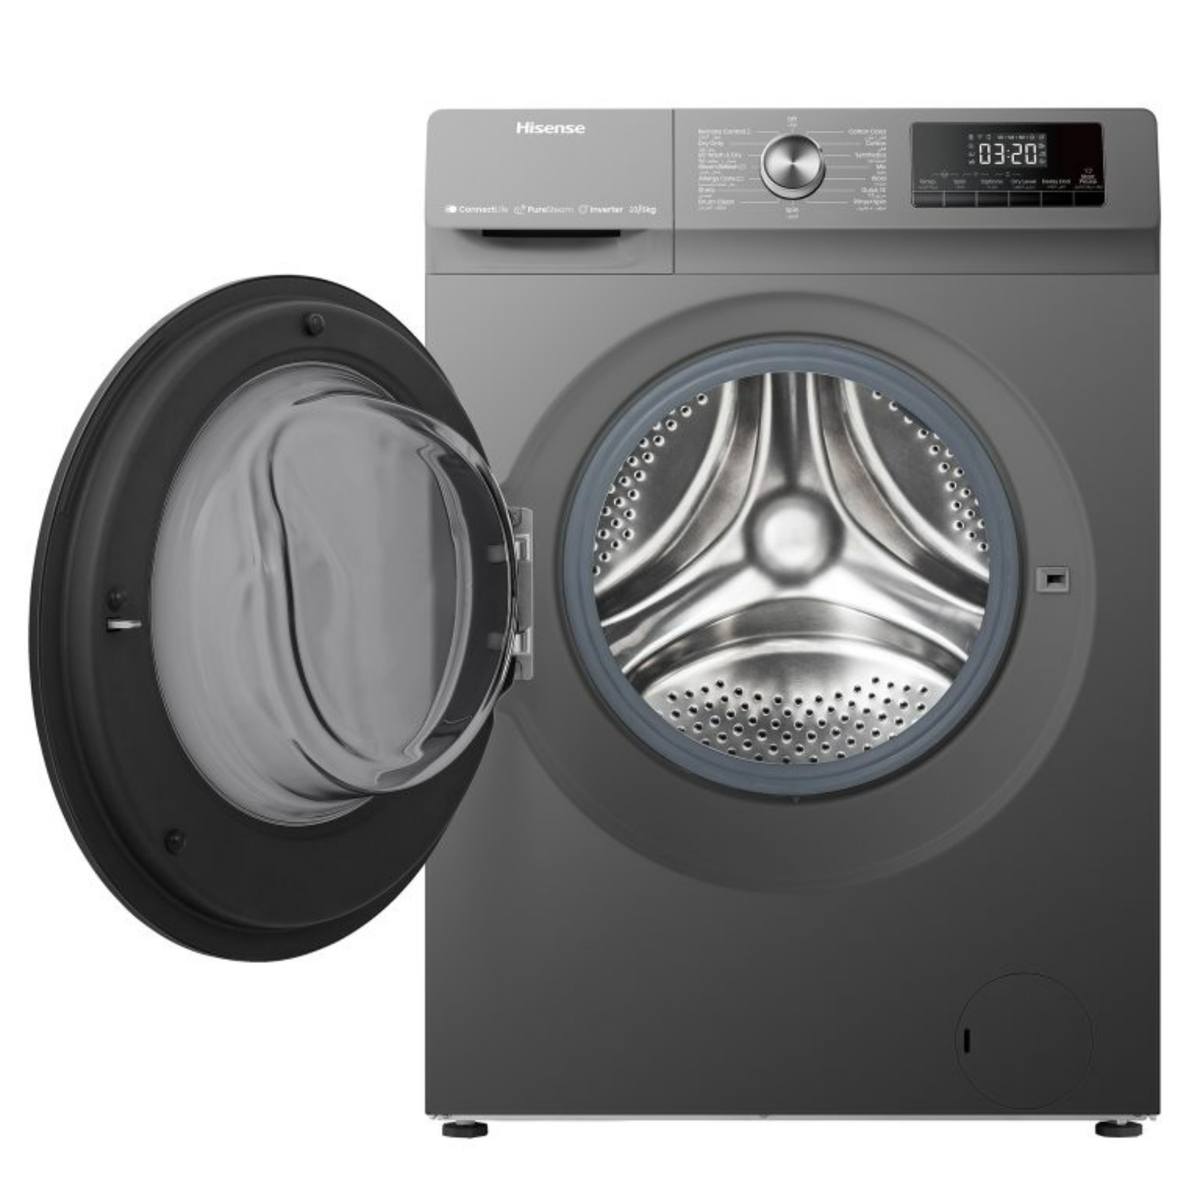 Hisense Front Load Washer and Dryer, 10/6 kg, 1400 RPM, Titanium Silver, WDQA1014VJMWT